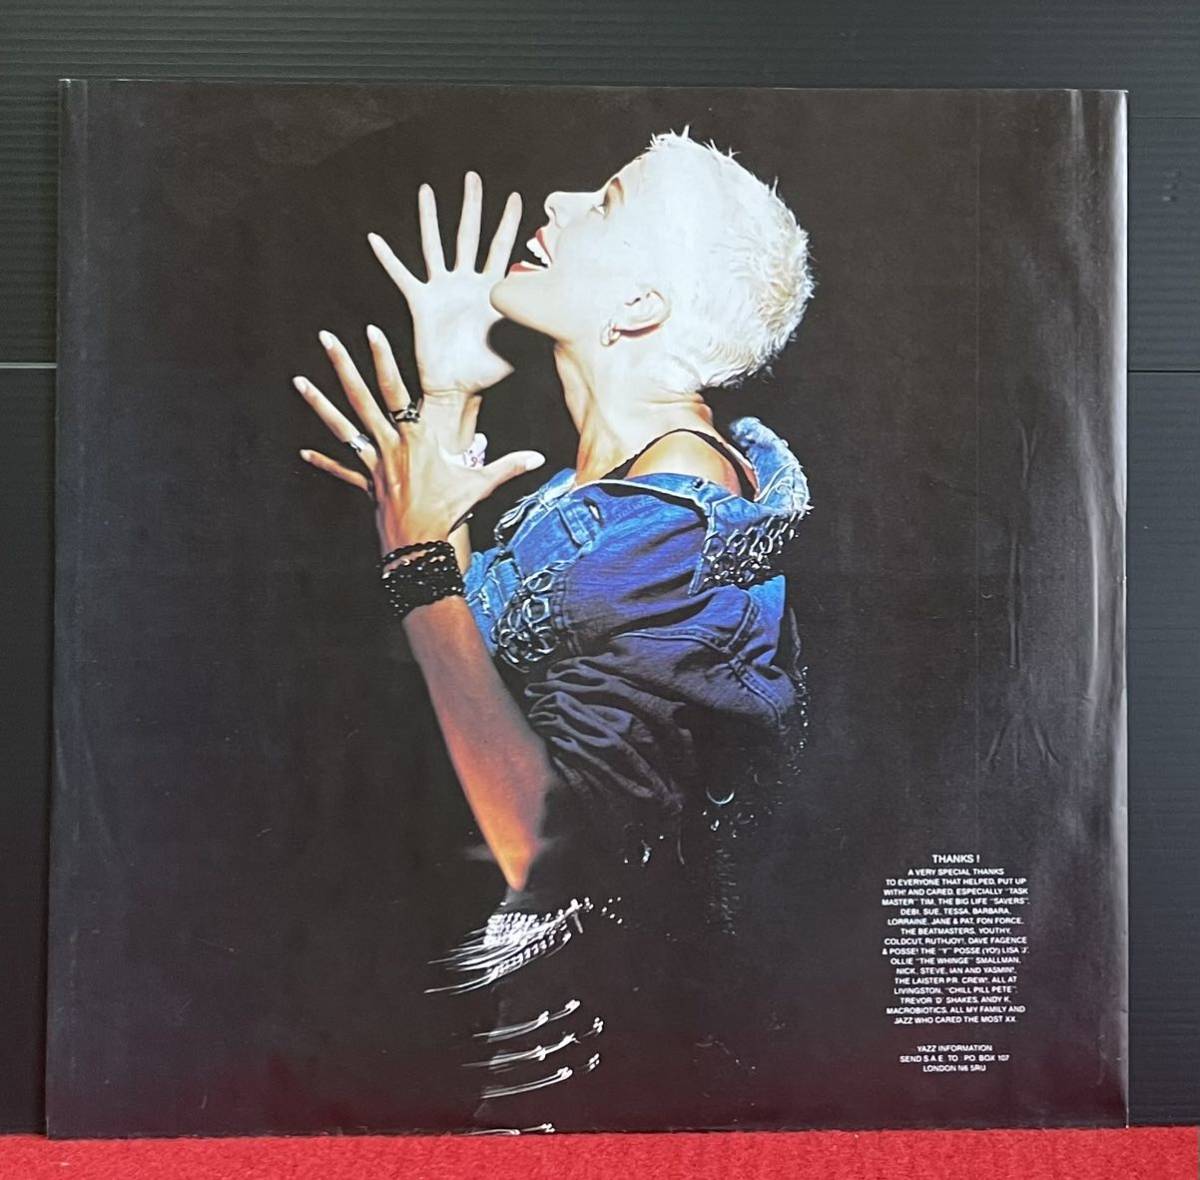 Yazz / Stand Up For Your Love Rights収録の人気アルバムWanted その他にもプロモーション盤 レア盤 人気レコード 多数出品。_画像2